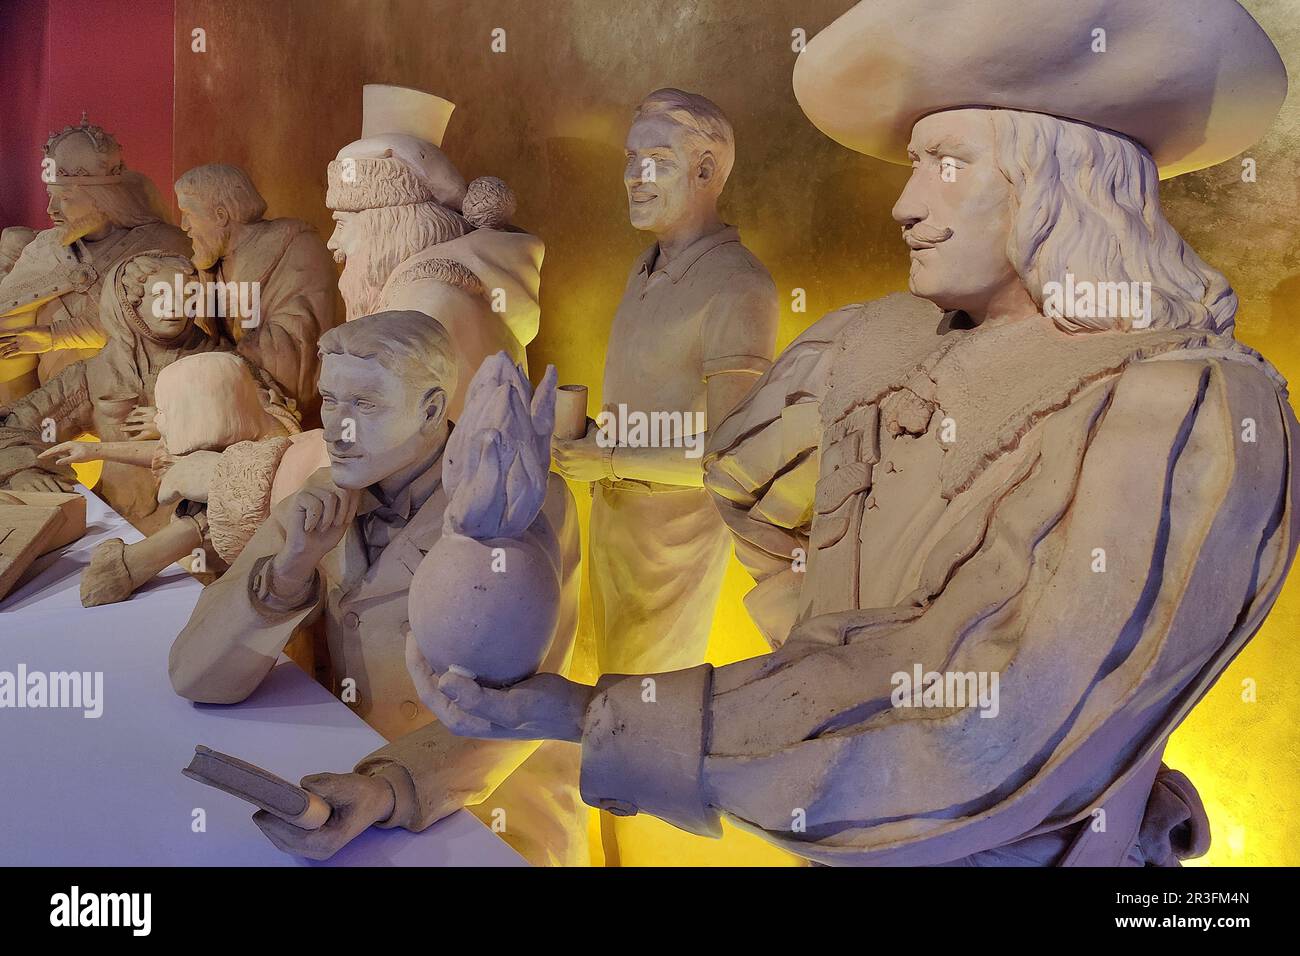 Historical figures made of marzipan, Niederegger Marzipan Museum, Luebeck, Germany, Europe Stock Photo